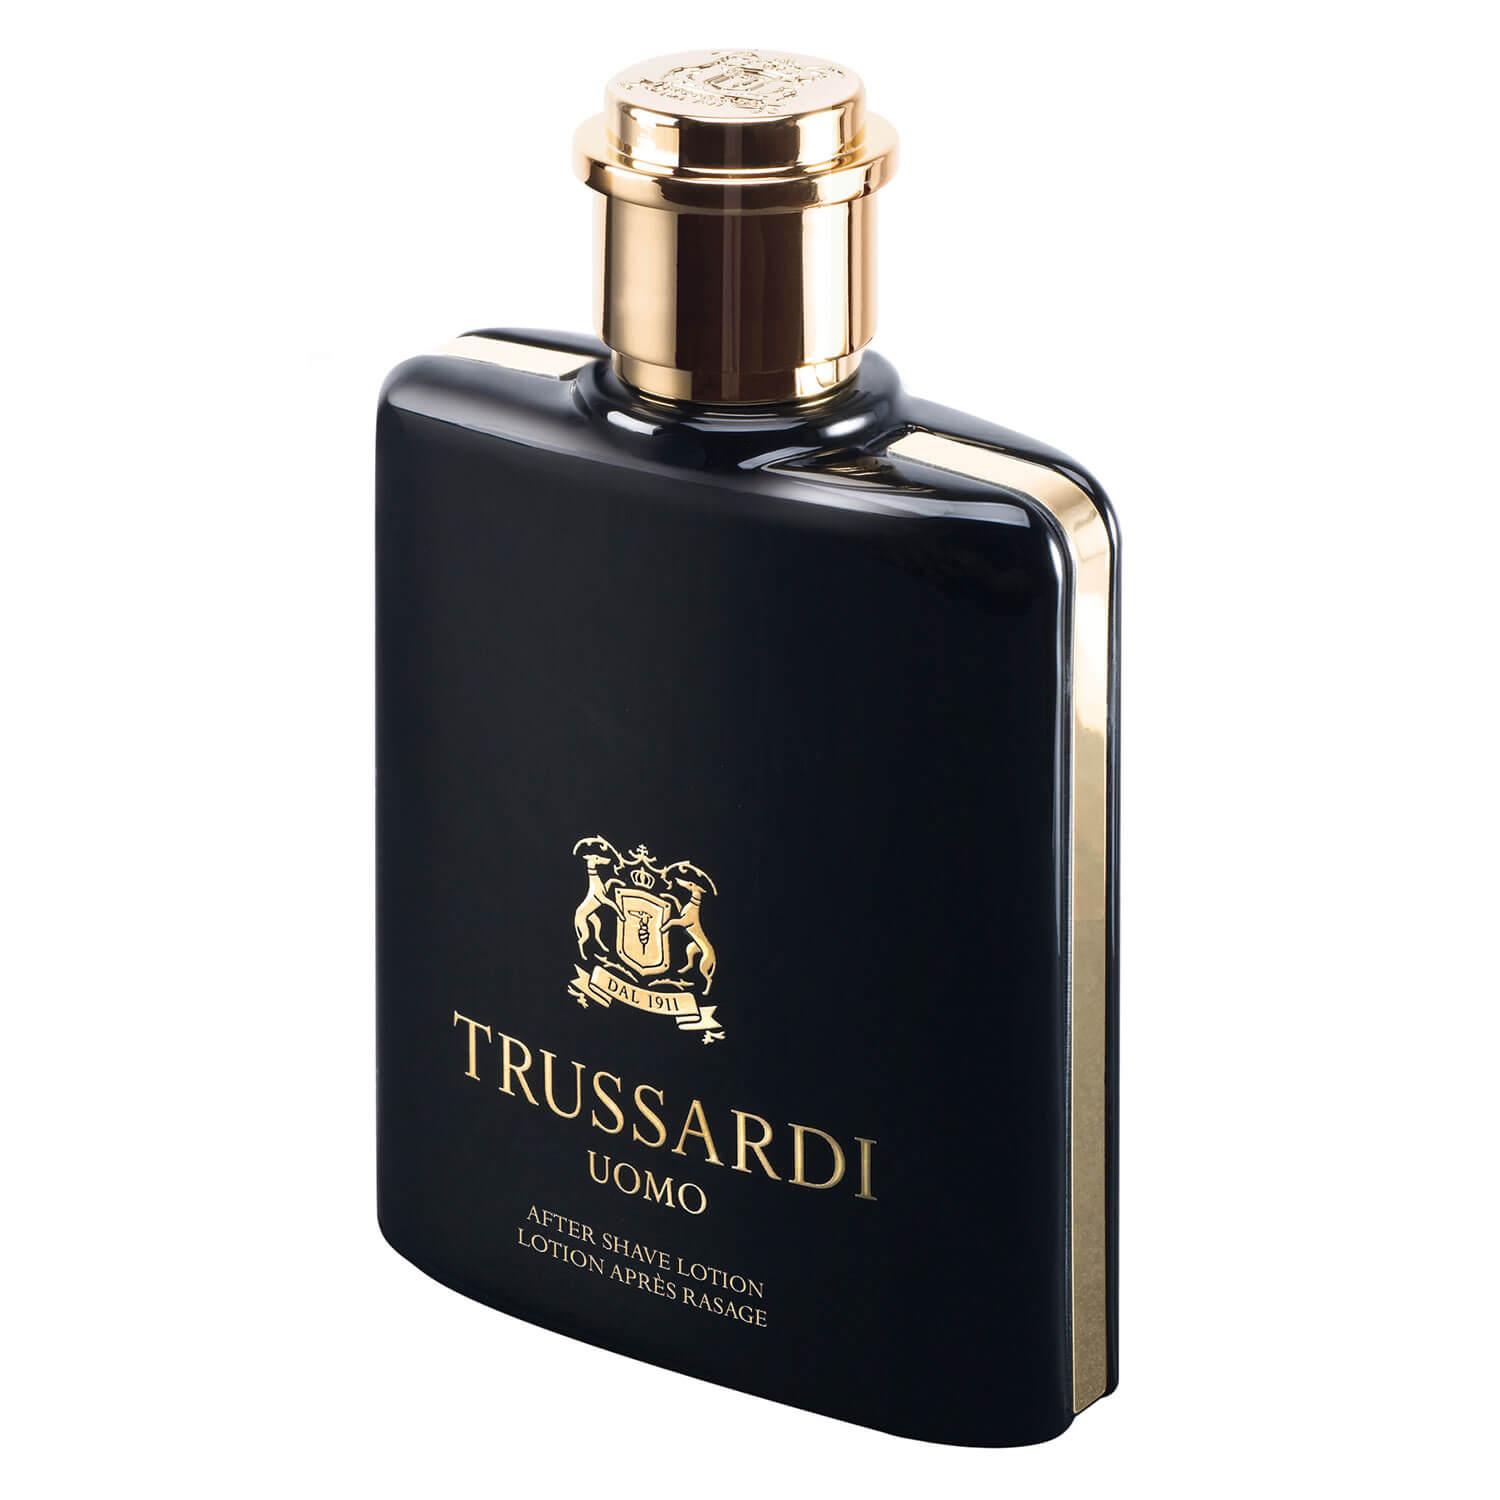 Trussardi Uomo - After Shave Lotion